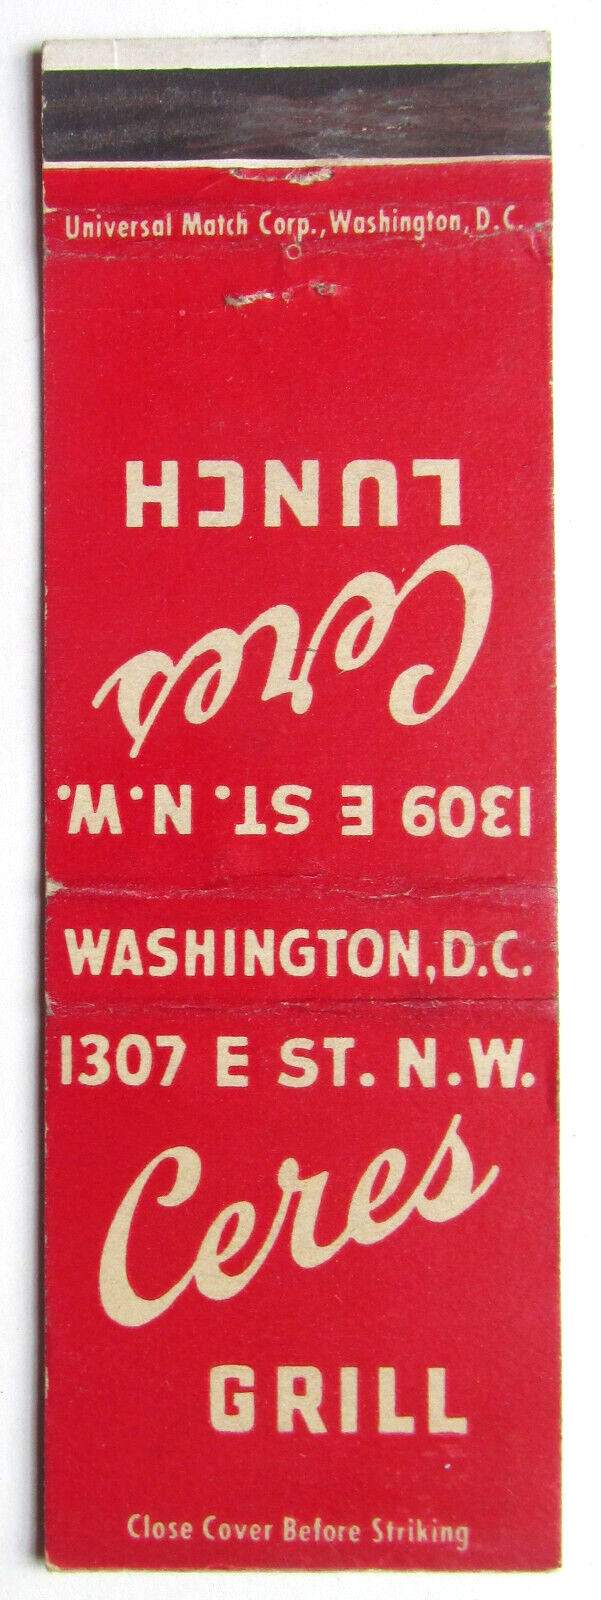 Ceres Grill / Ceres Lunch - Washington, DC Restaurant 20 Strike Matchbook Cover